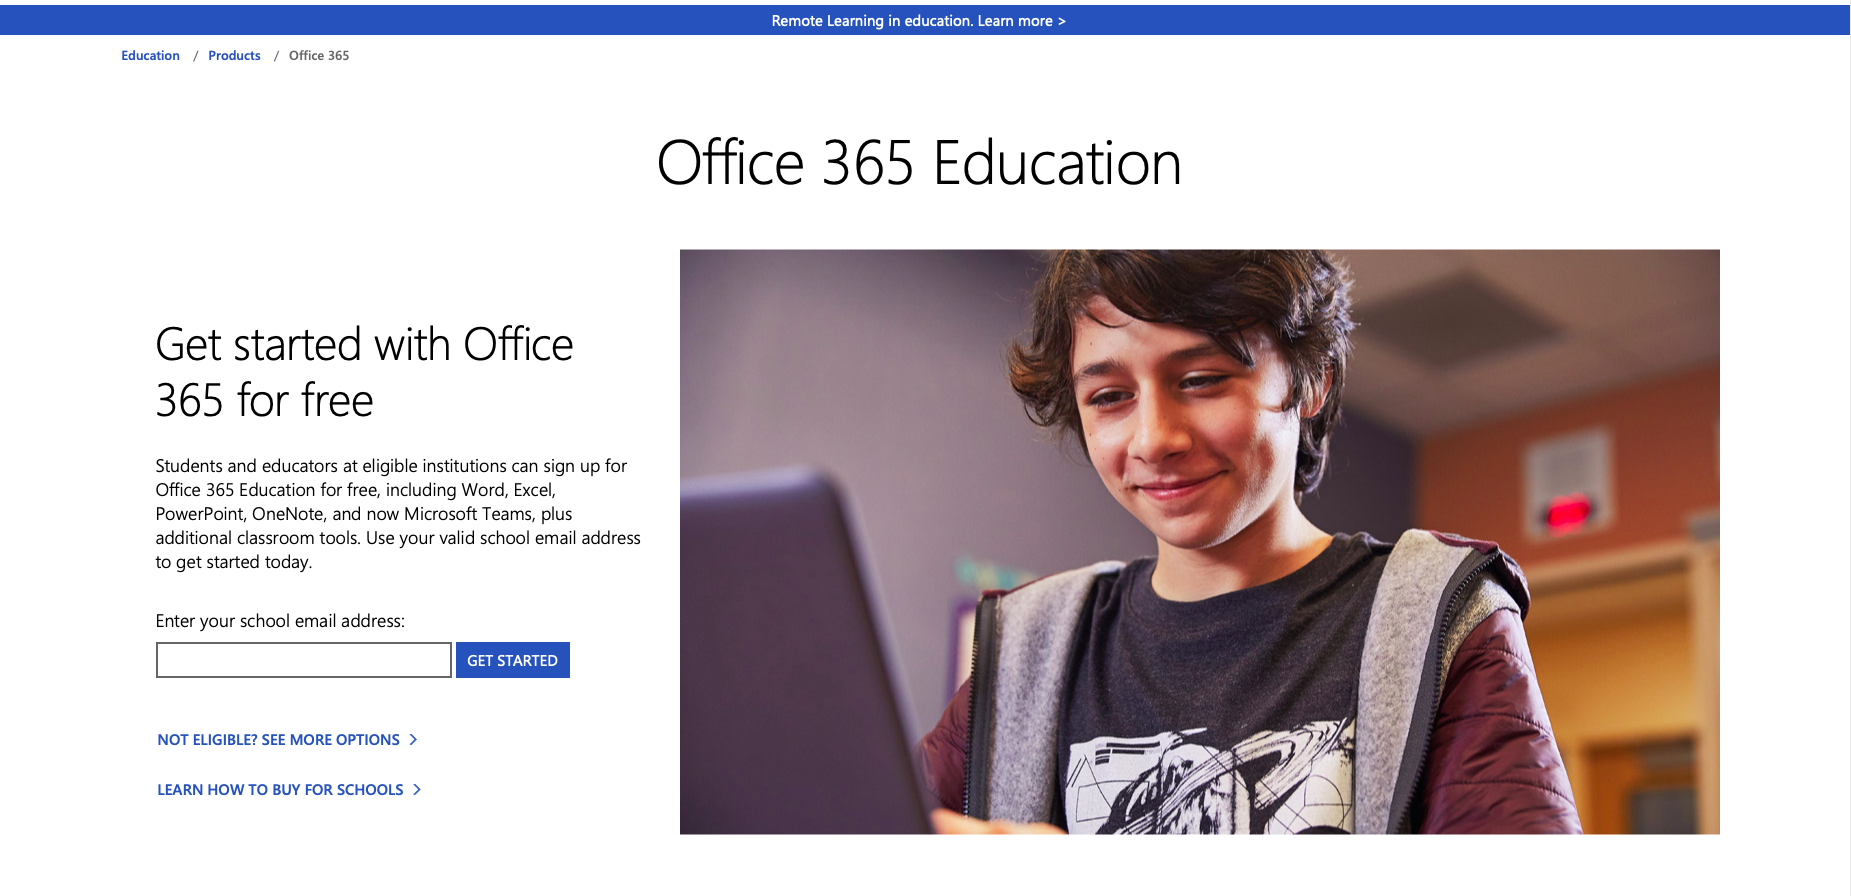 how to get microsoft office for free using school account